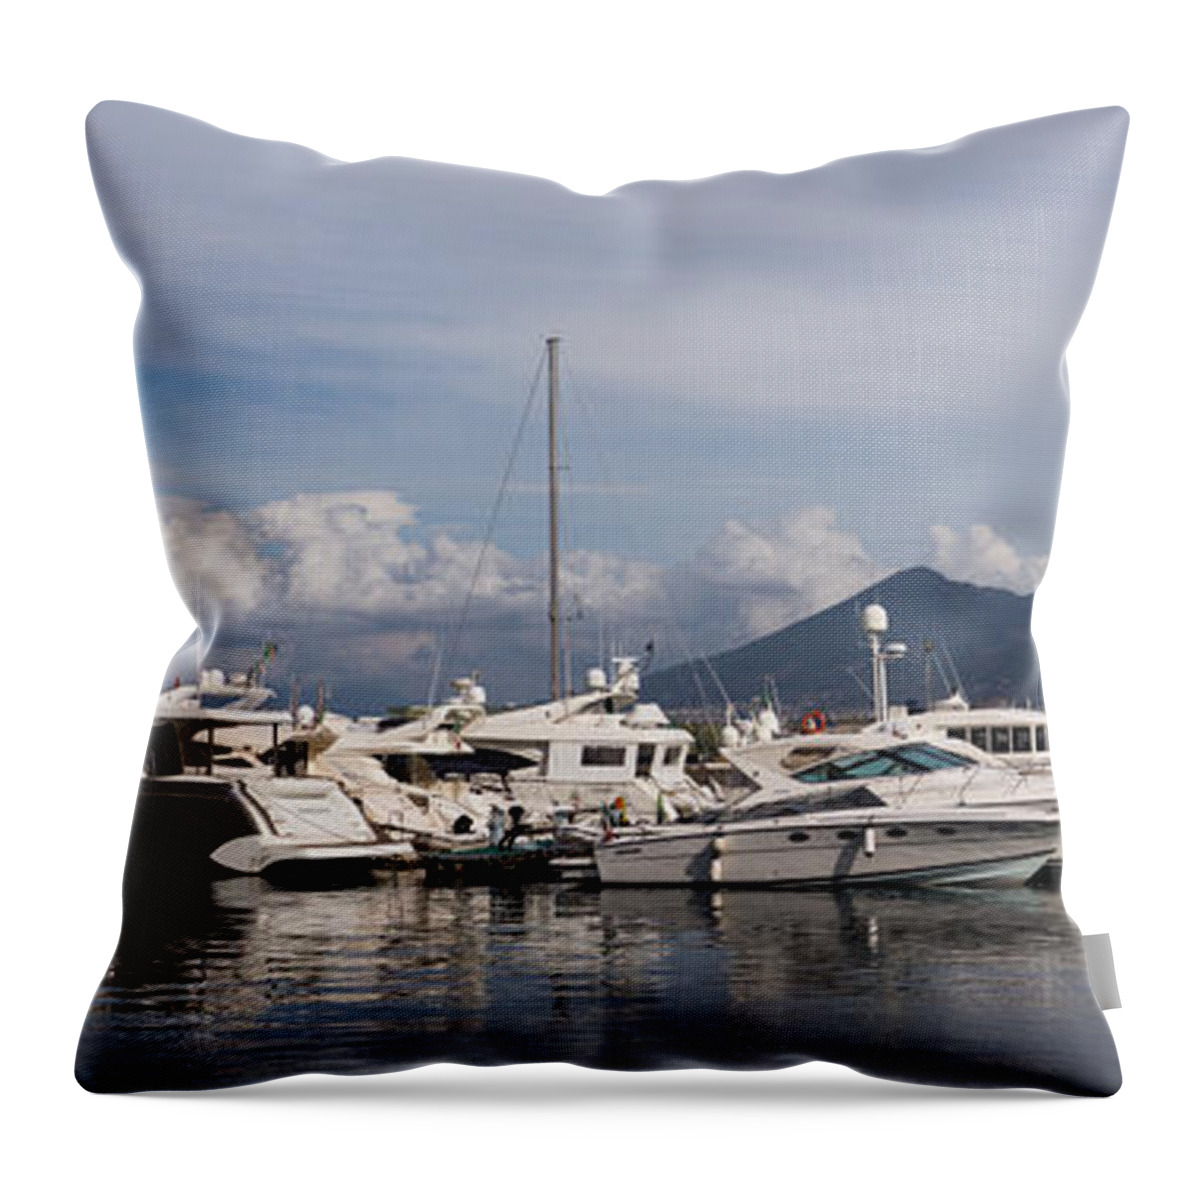 Sail Boat Throw Pillow featuring the photograph Vesuvius and the Boats by Georgia Mizuleva